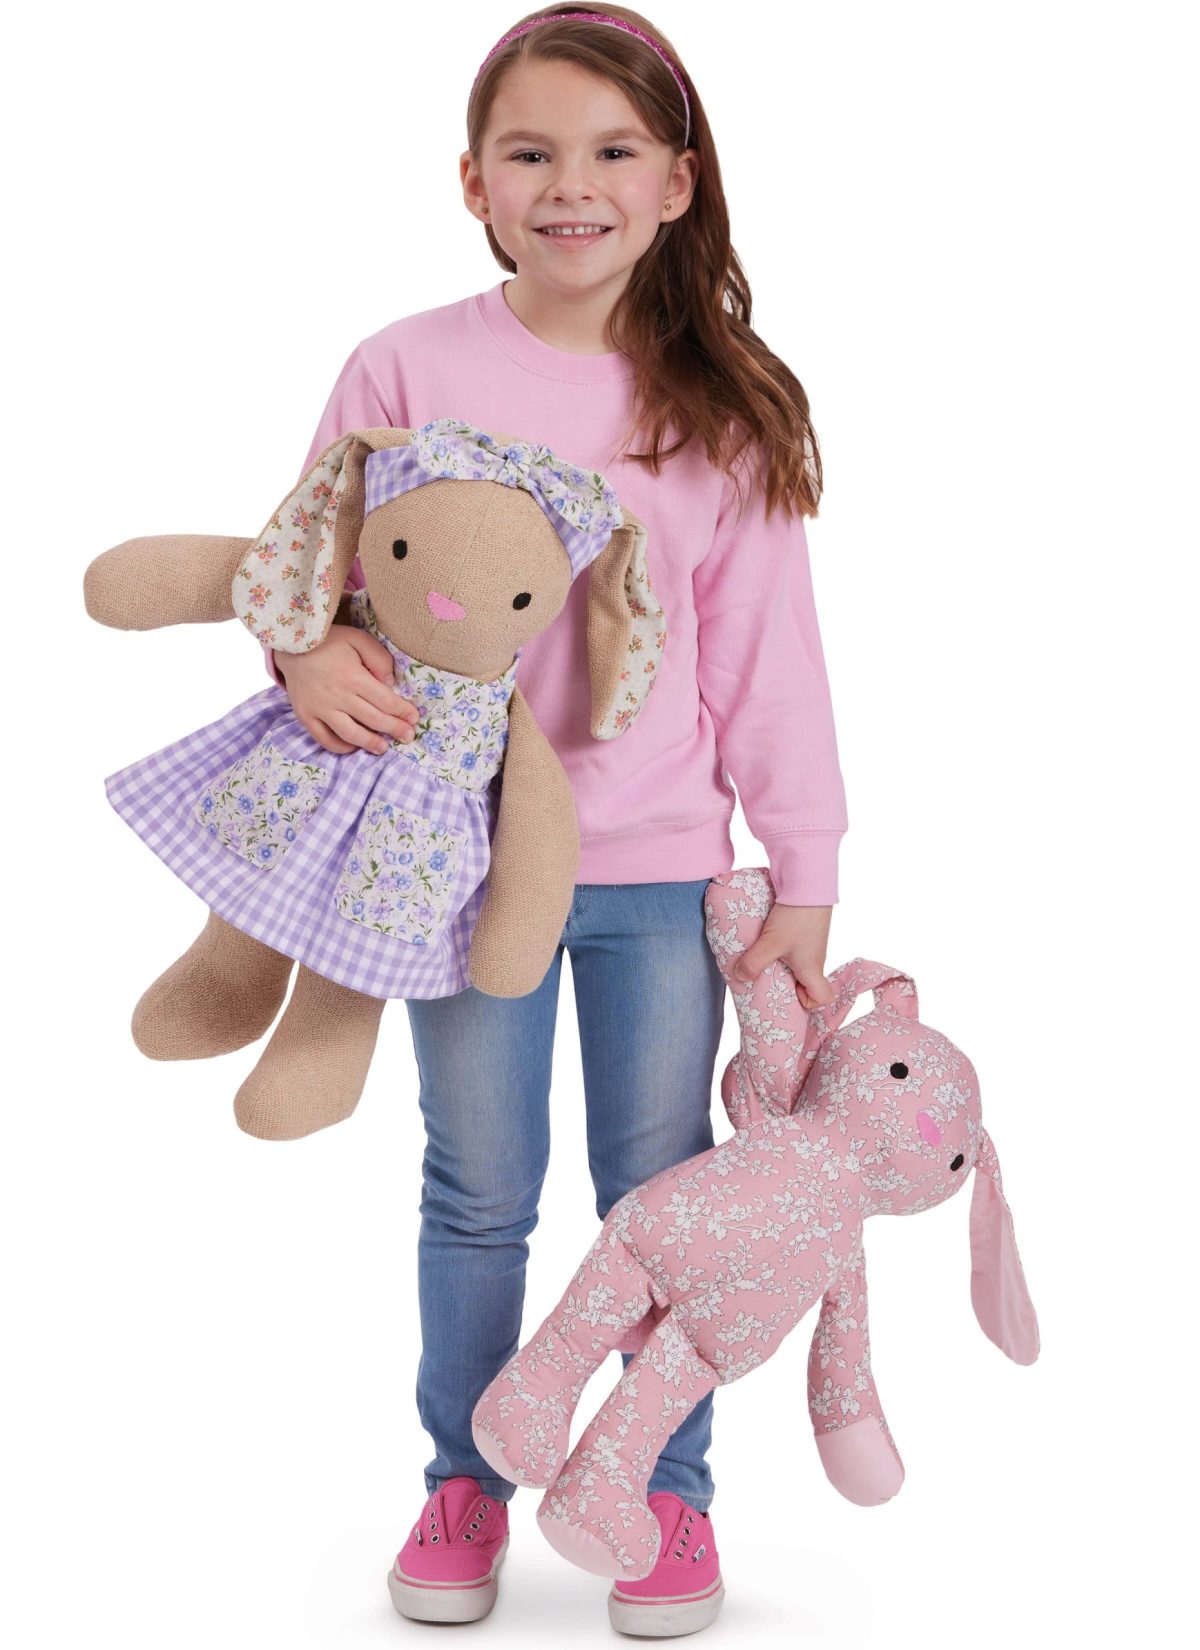 McCall's Sewing Pattern M8422 Plush Bear, Bunny and Mouse with Clothes and Headband